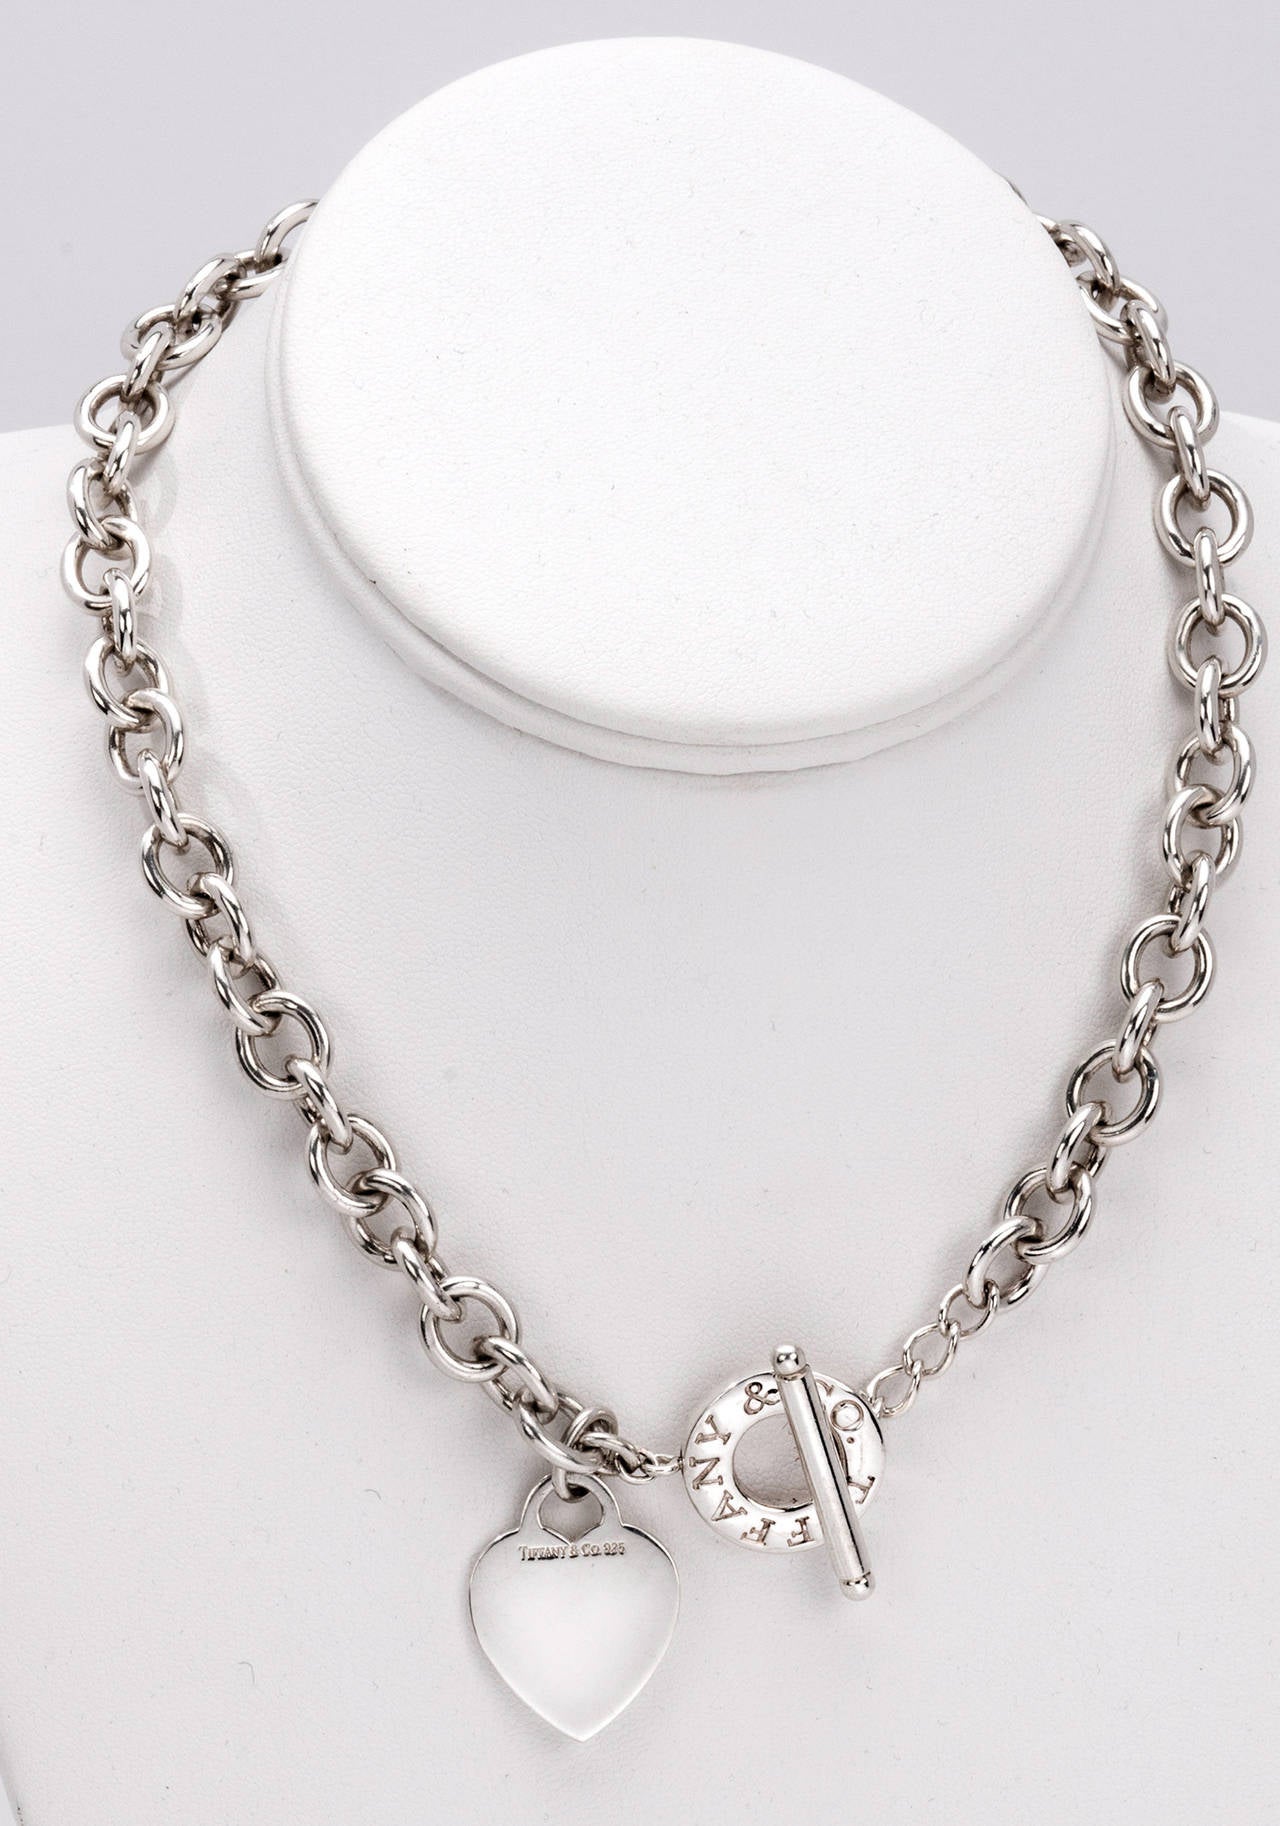 Hall marked Tiffany & Co 925  neck chain with heart and toggle clasp.
16